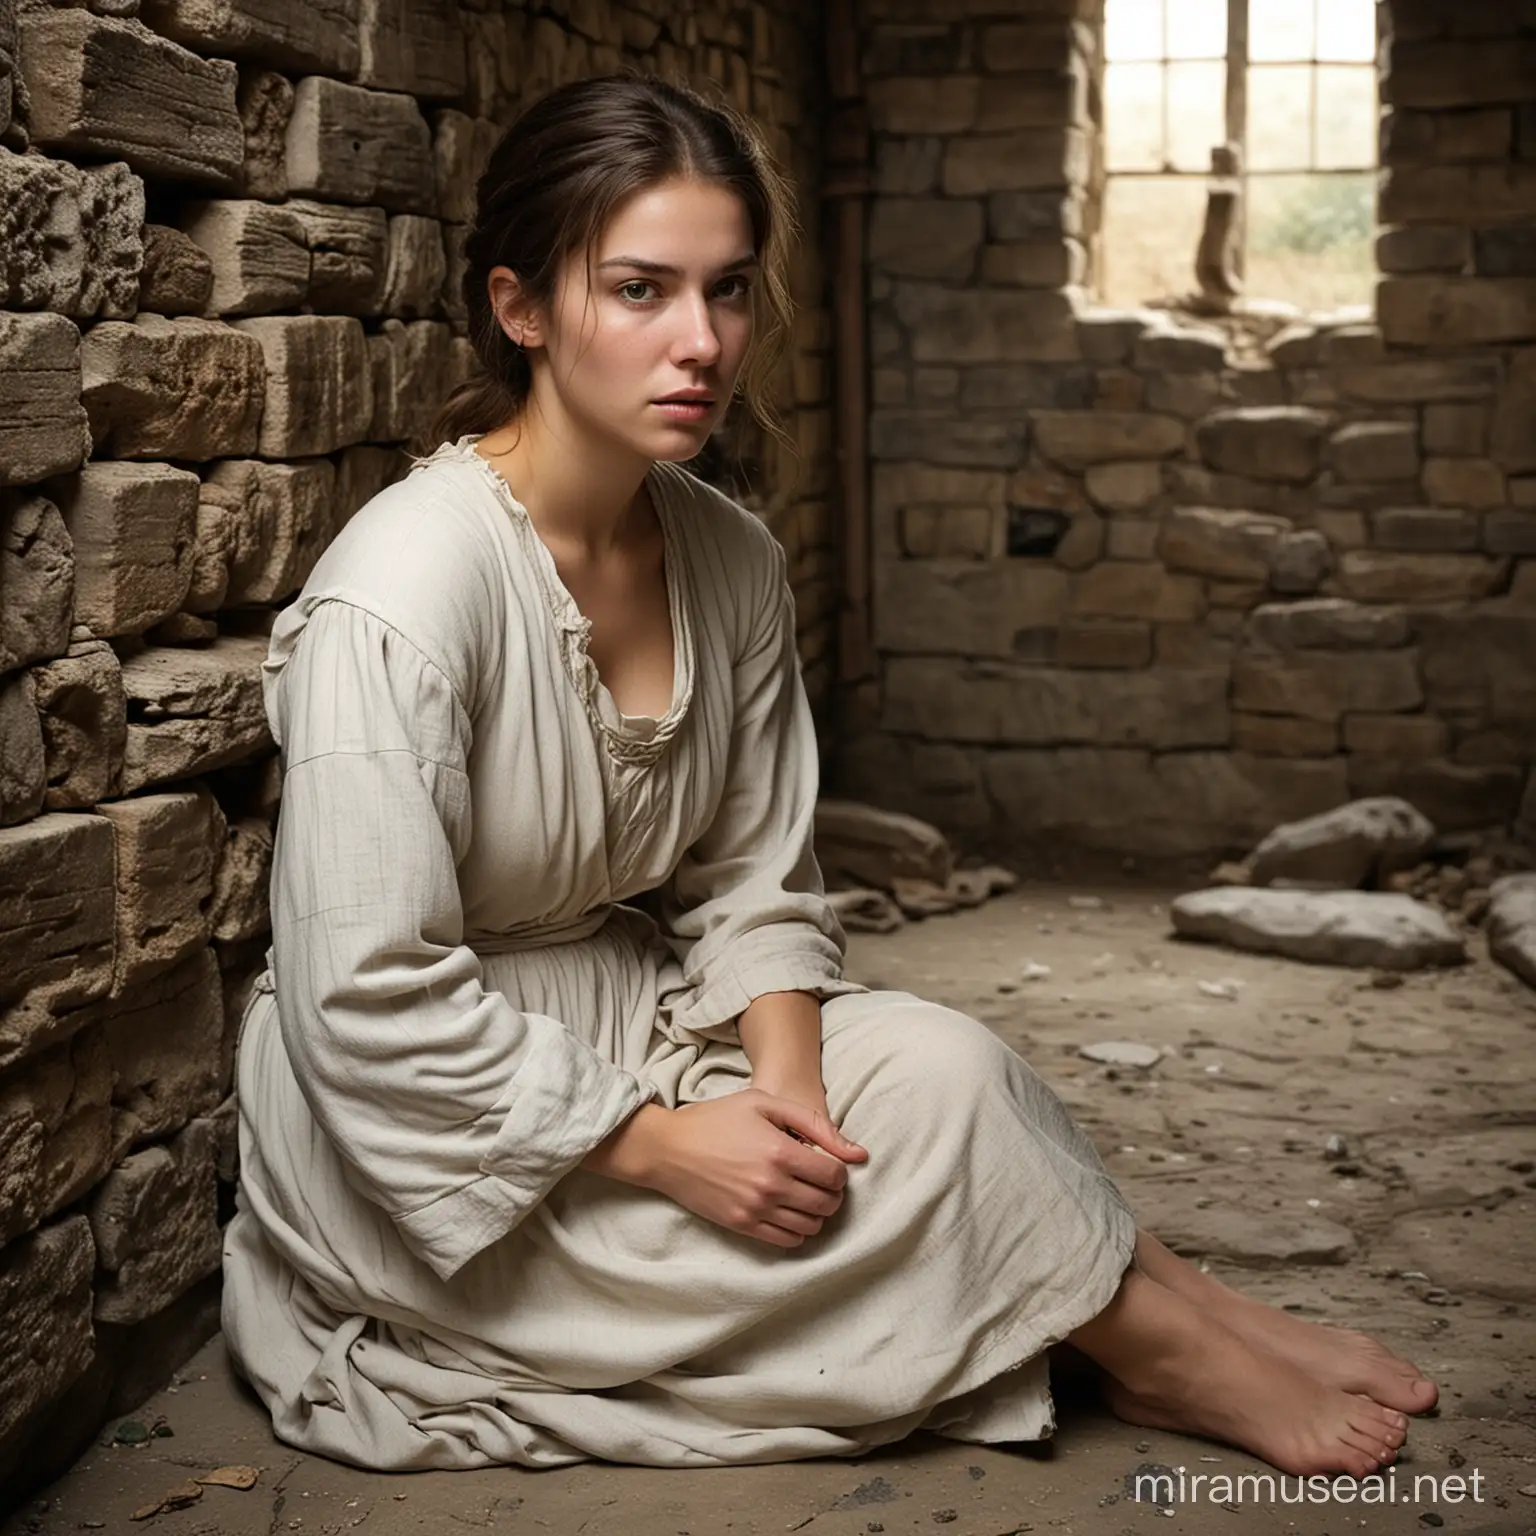 Desperate Young Peasant Woman in Dungeon Cell